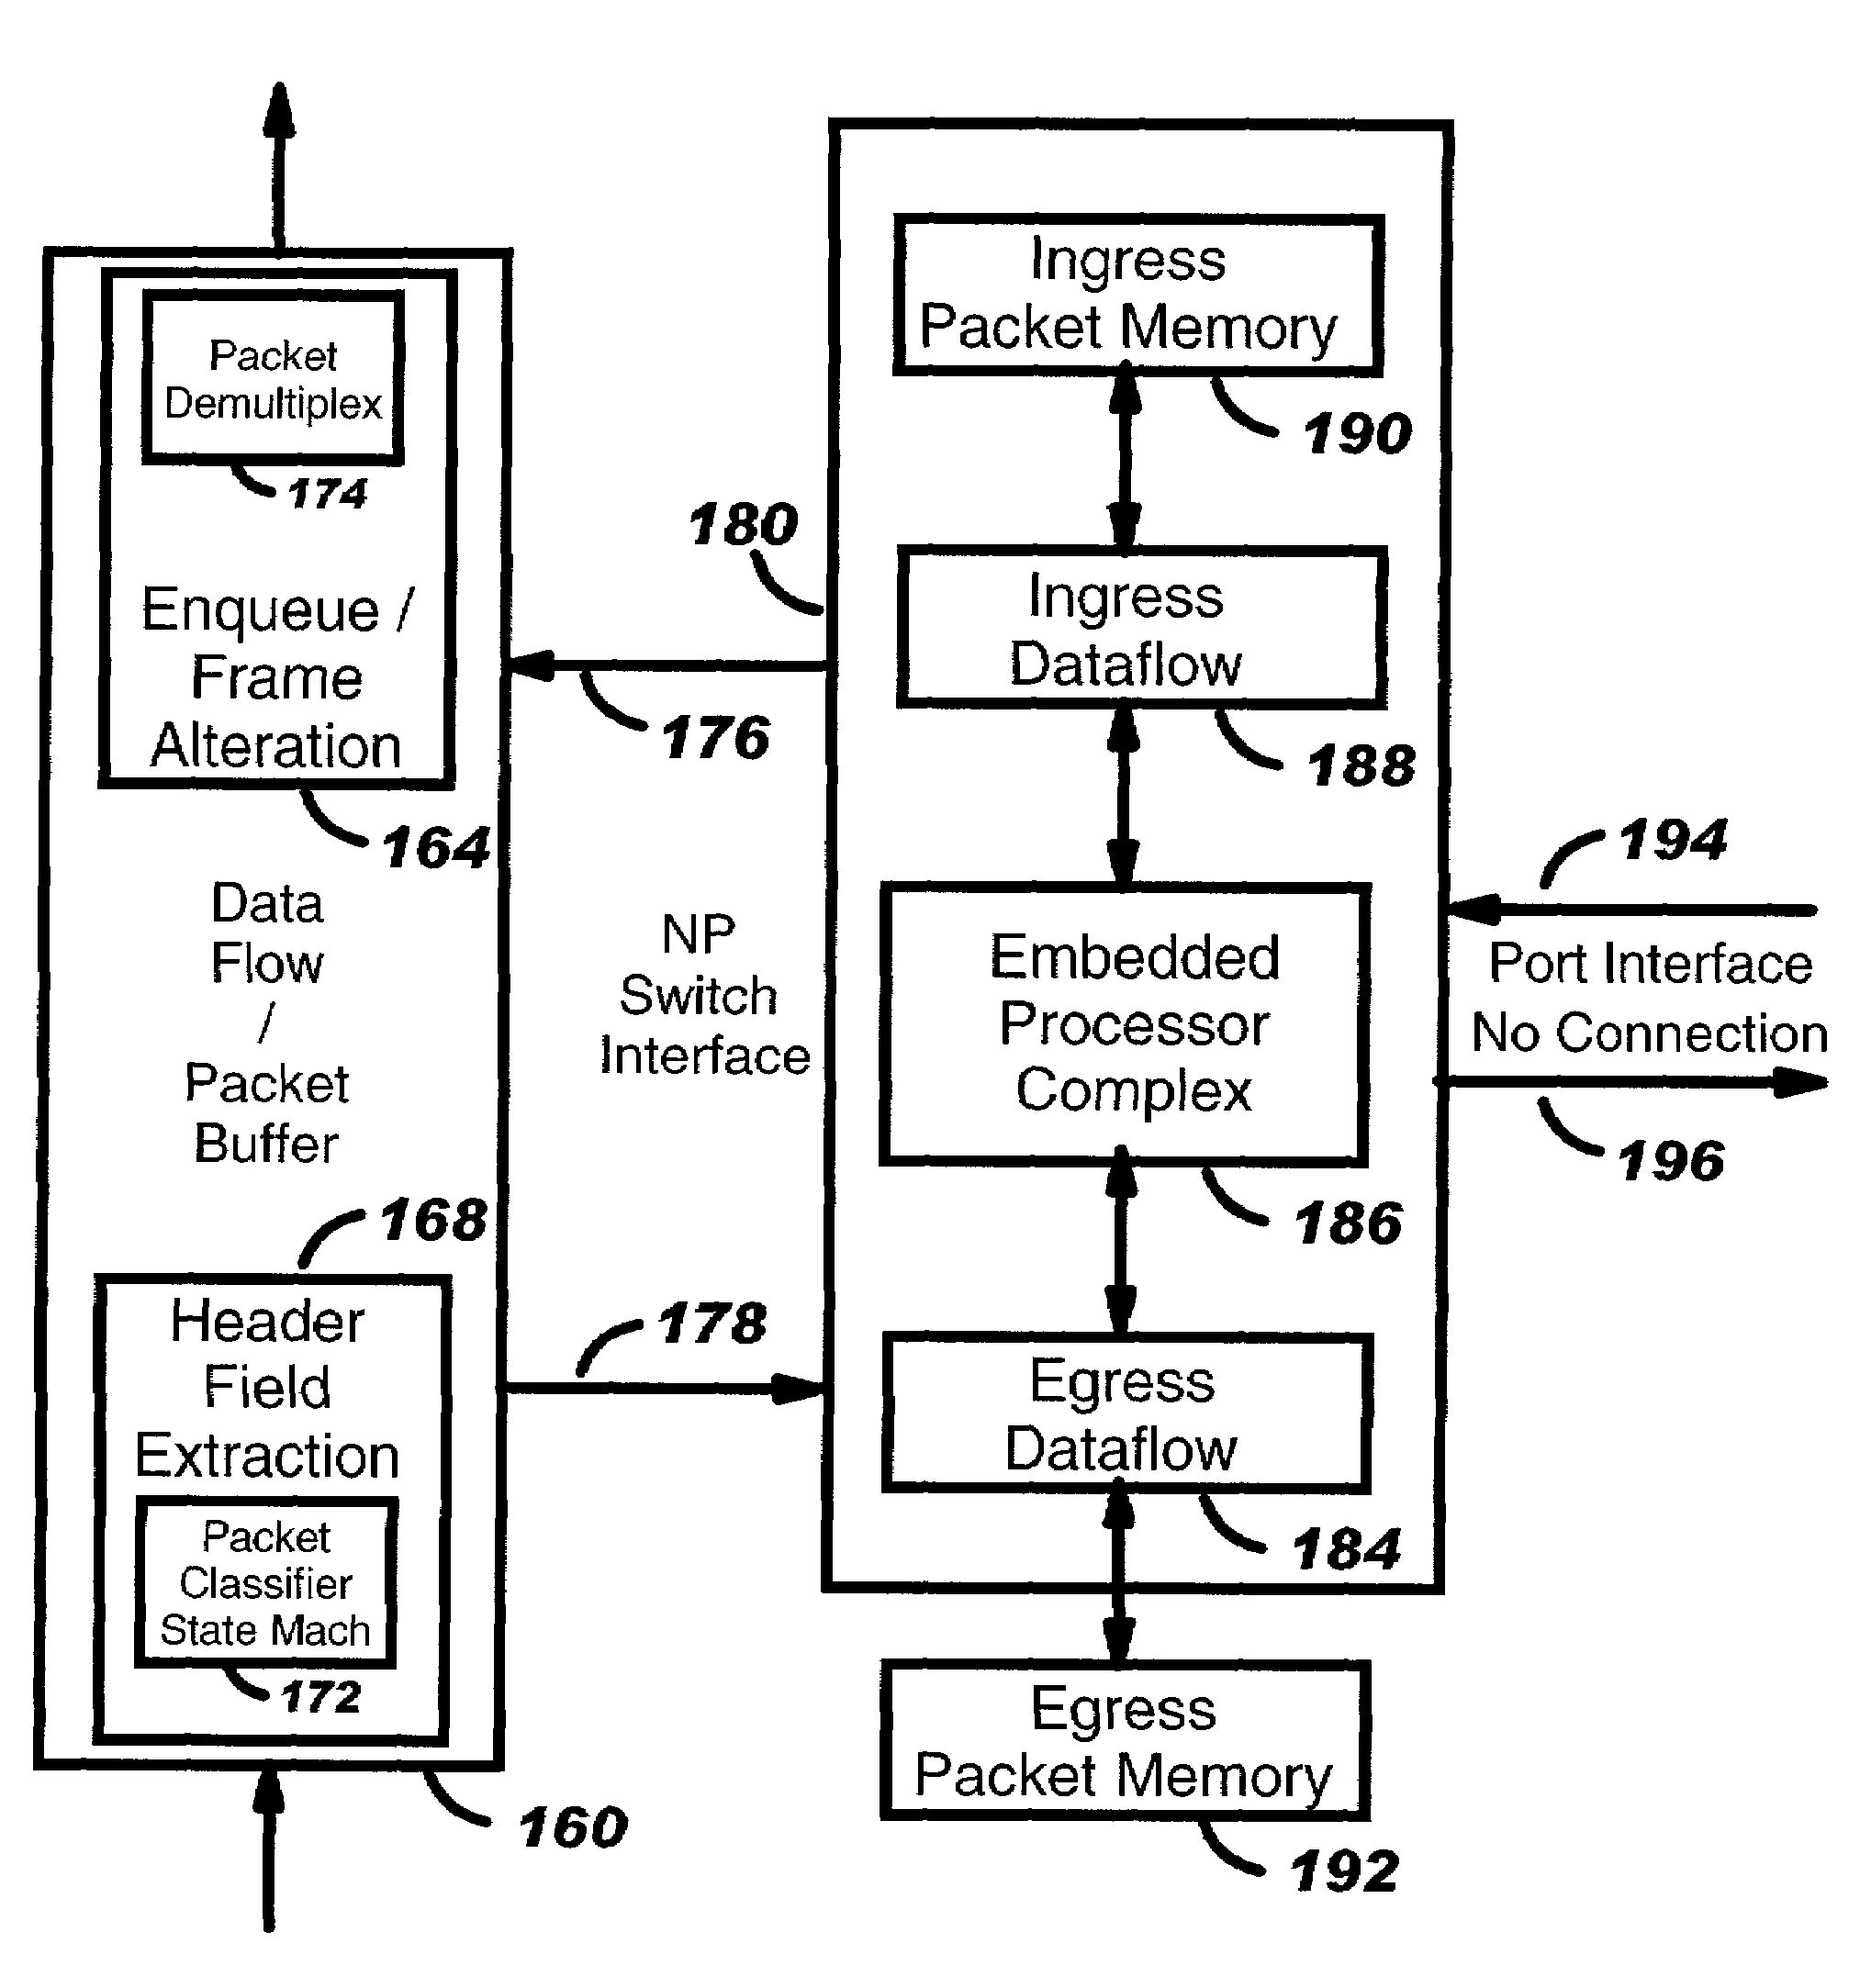 Selective header field dispatch in a network processing system